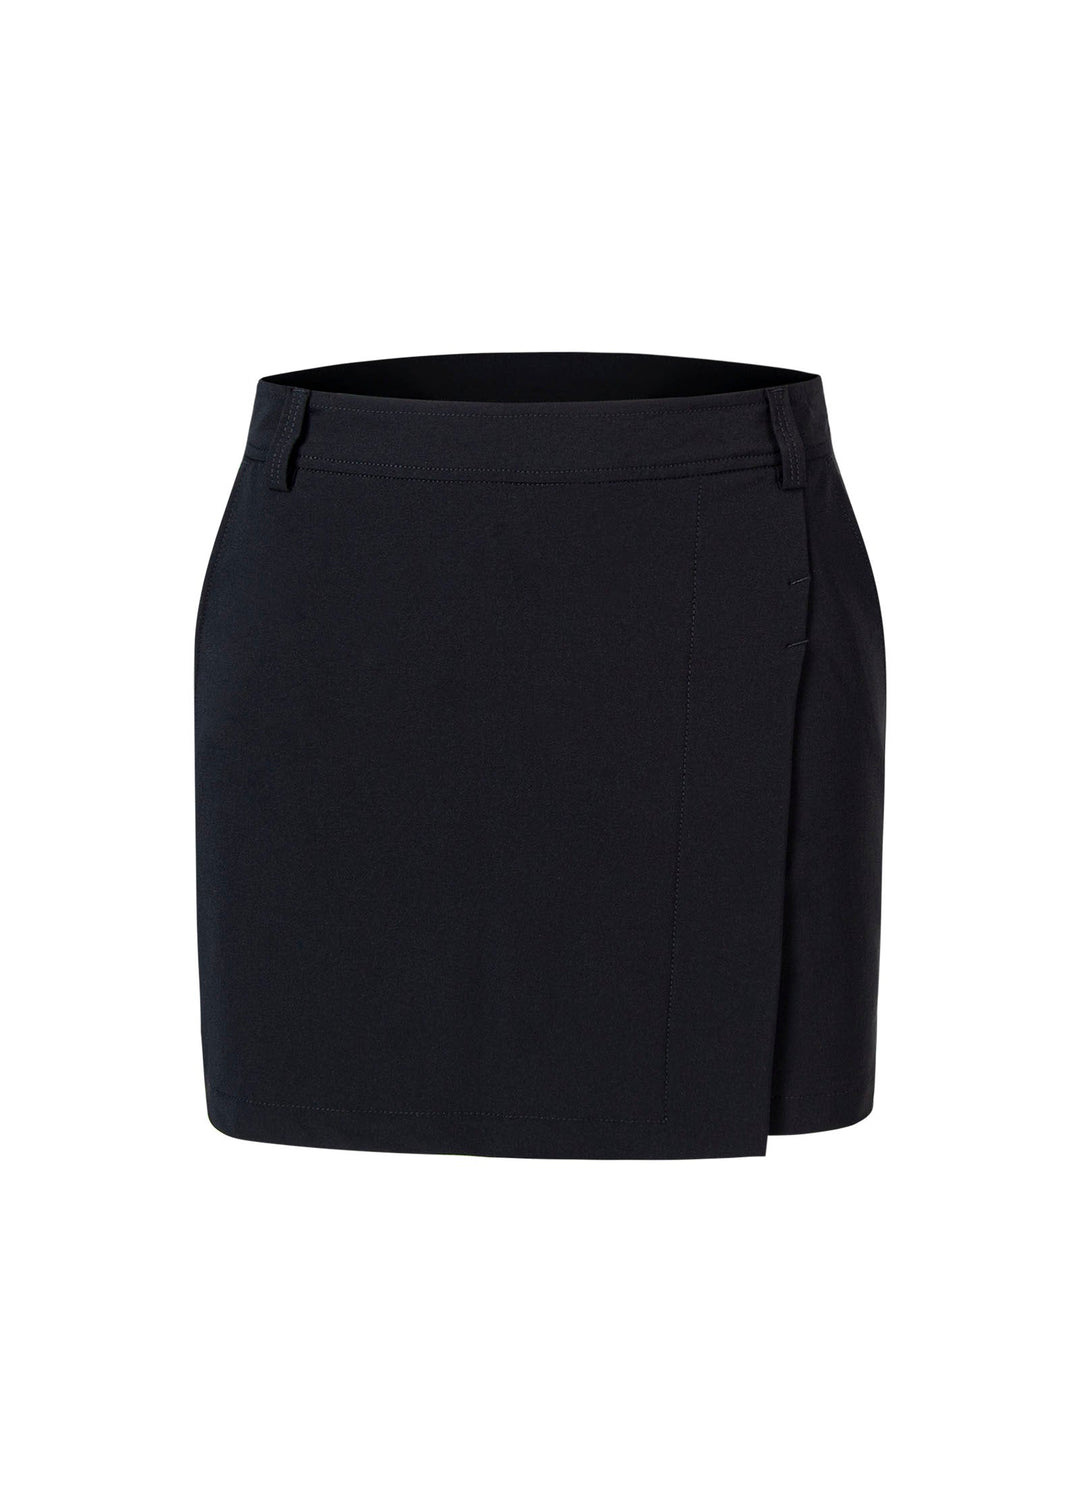 Outdoor Stretch Skirt Woman - Nero - Blogside